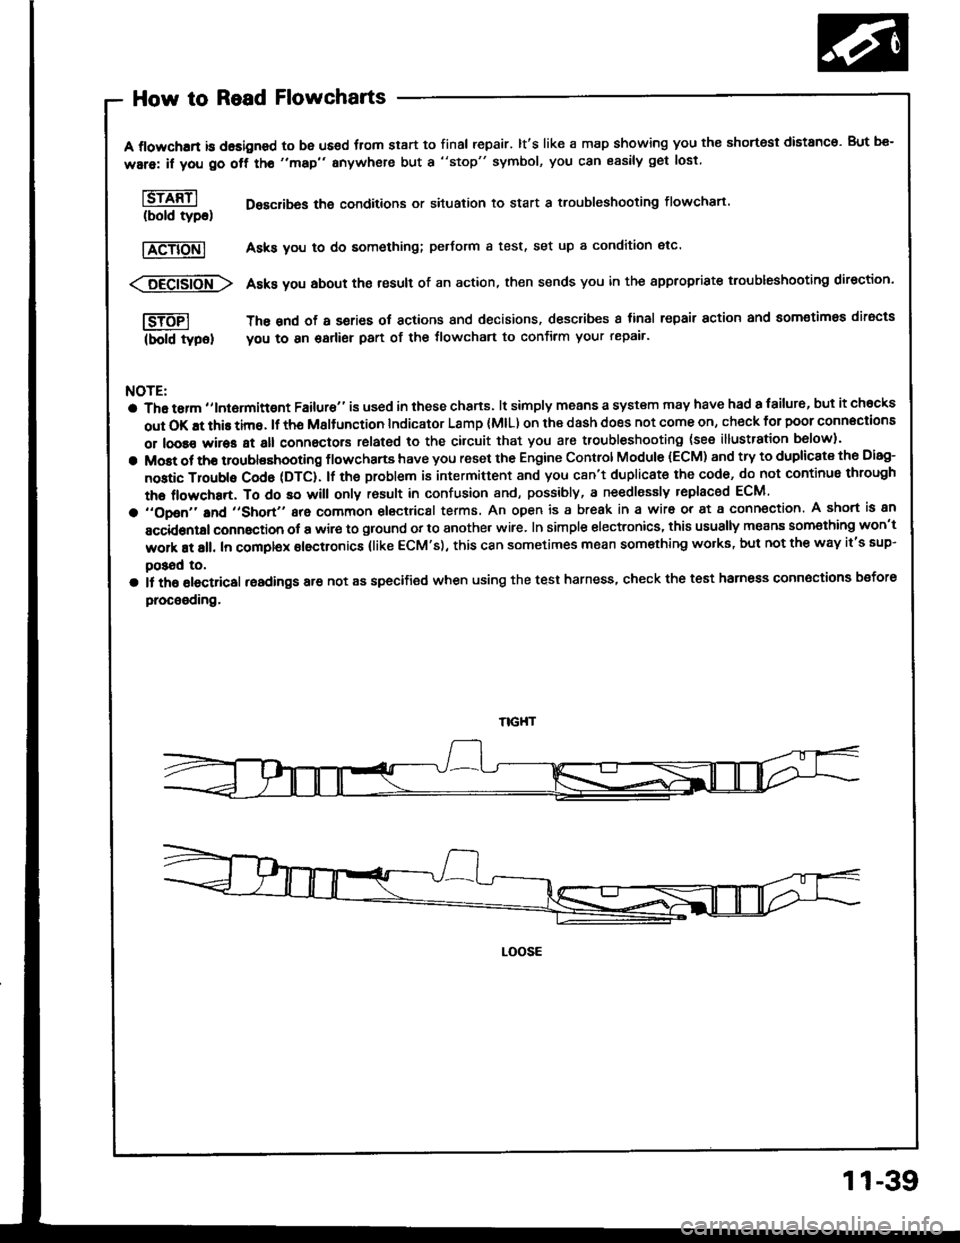 ACURA INTEGRA 1994  Service Repair Manual How to Read Flowcharts
A flowchrrt is dasigned to be us€d fiom start to final repair. lts like a map showing you the shortest distanco. But be-
ware: if you go off tho "map" anywhere but a "stop" s